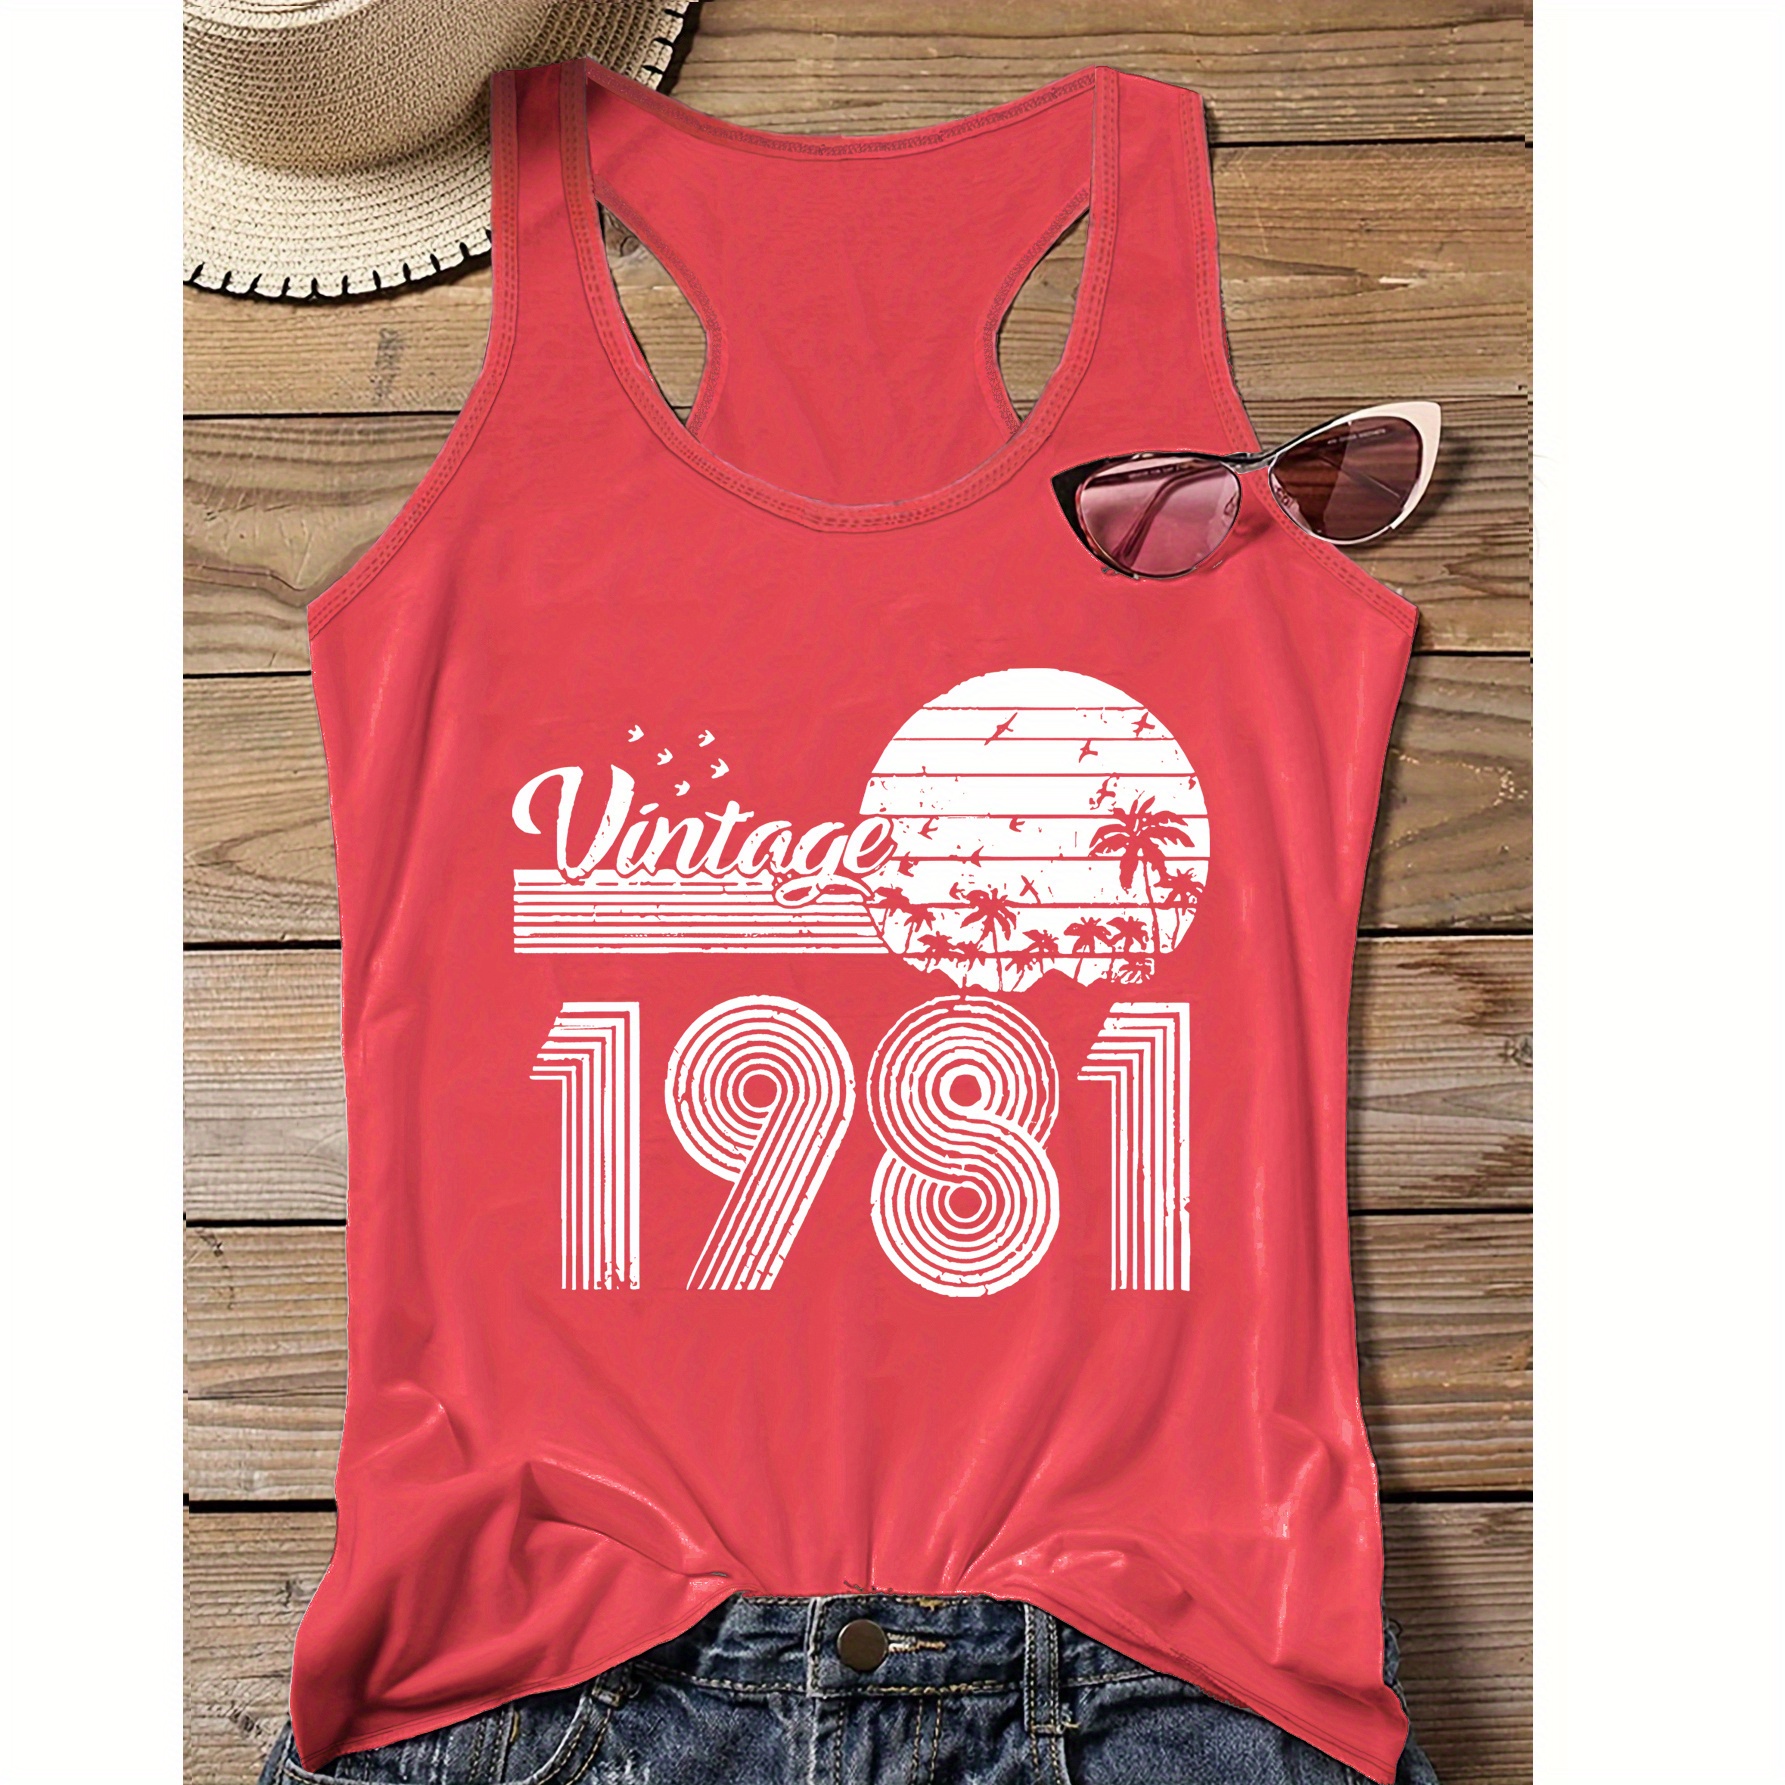 

Plus Size Casual Sporty 1981 Vintage Tree Sun Print Tank Top, Sleeveless Racer Back Casual Top For Summer & Spring, Women's Clothing